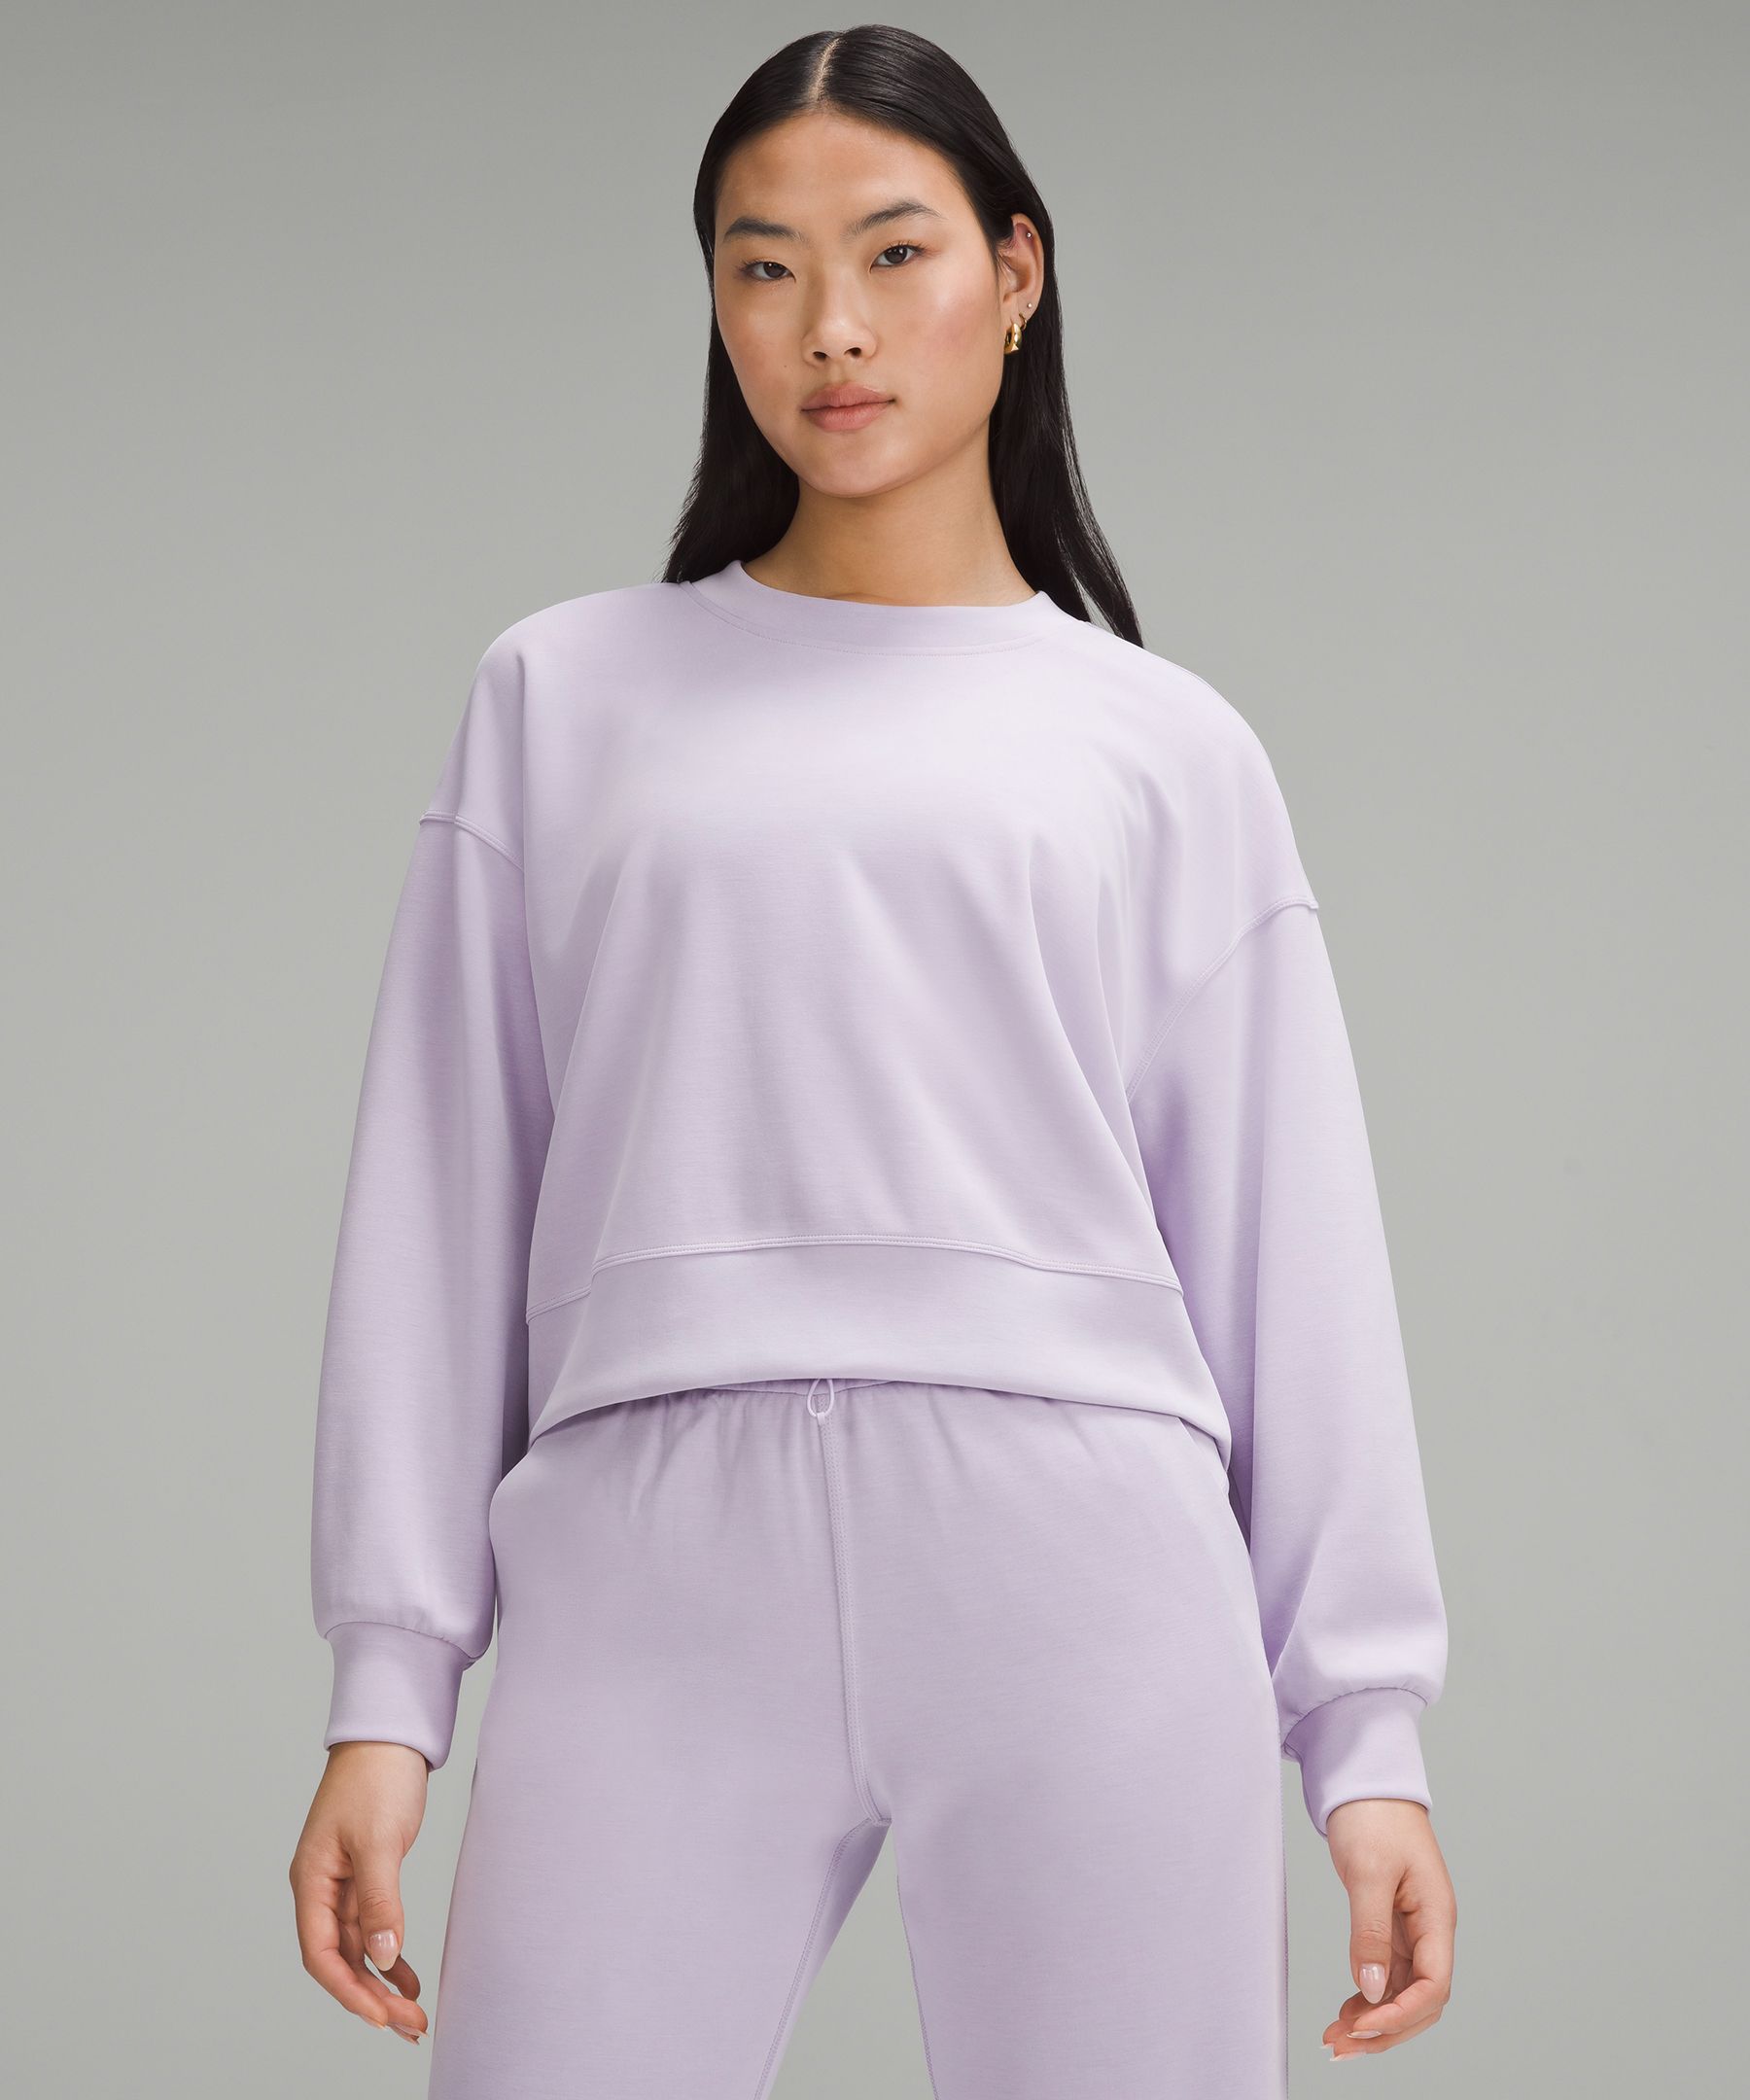 Lululemon Cropped Sweatshirt Blue Size 6 - $45 (33% Off Retail) - From Laura